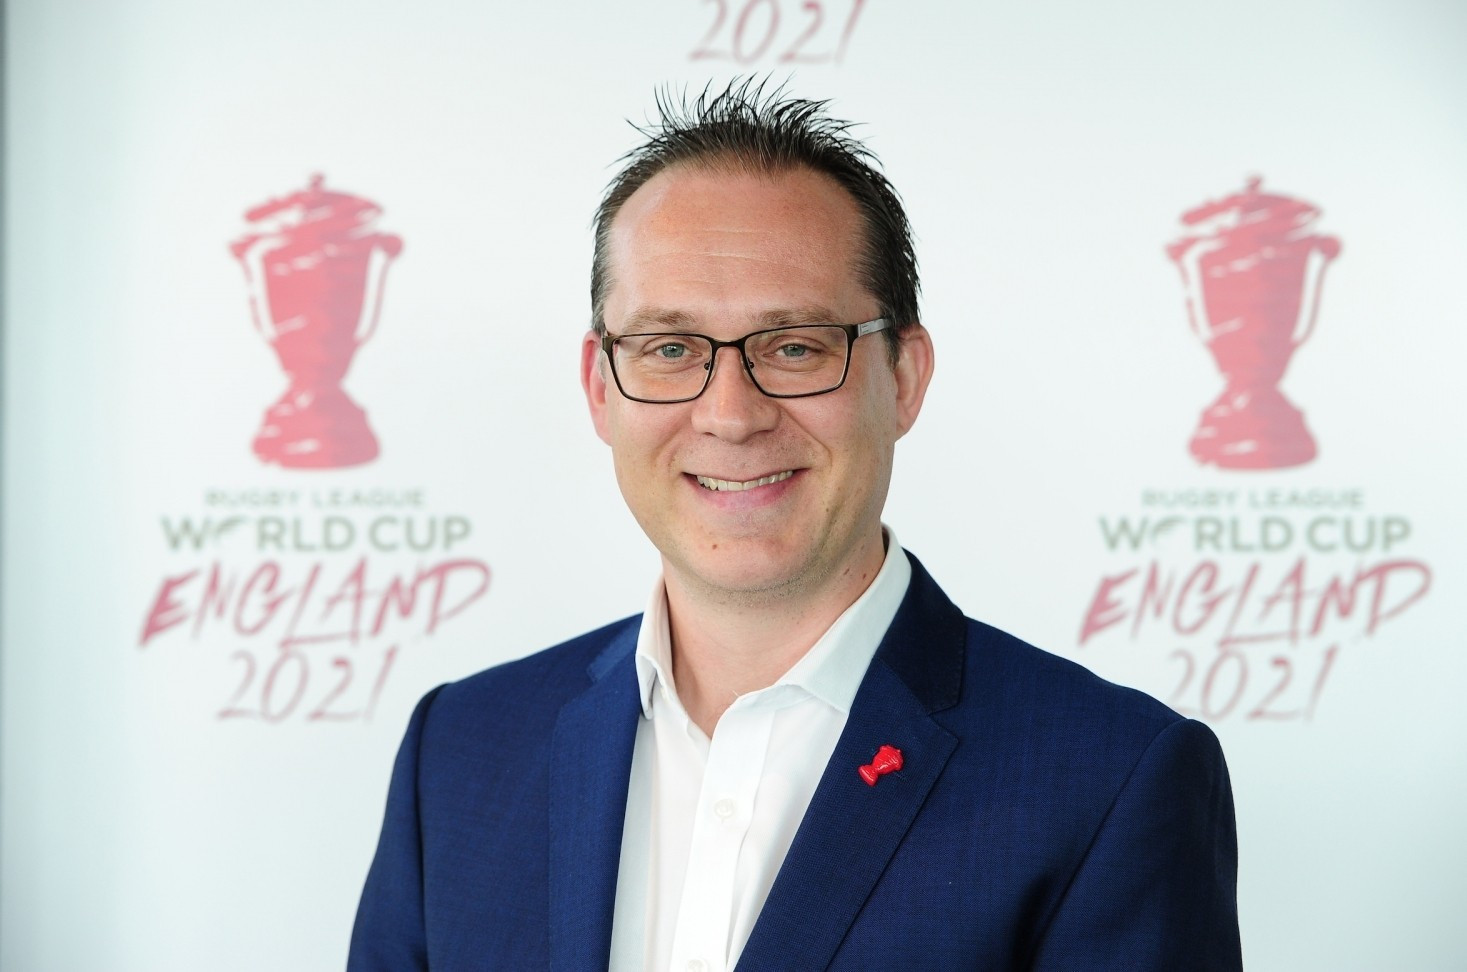 Rugby League World Cup 2021 chief executive Jon Dutton is confident of new attendance records being broken ©RLWC2021